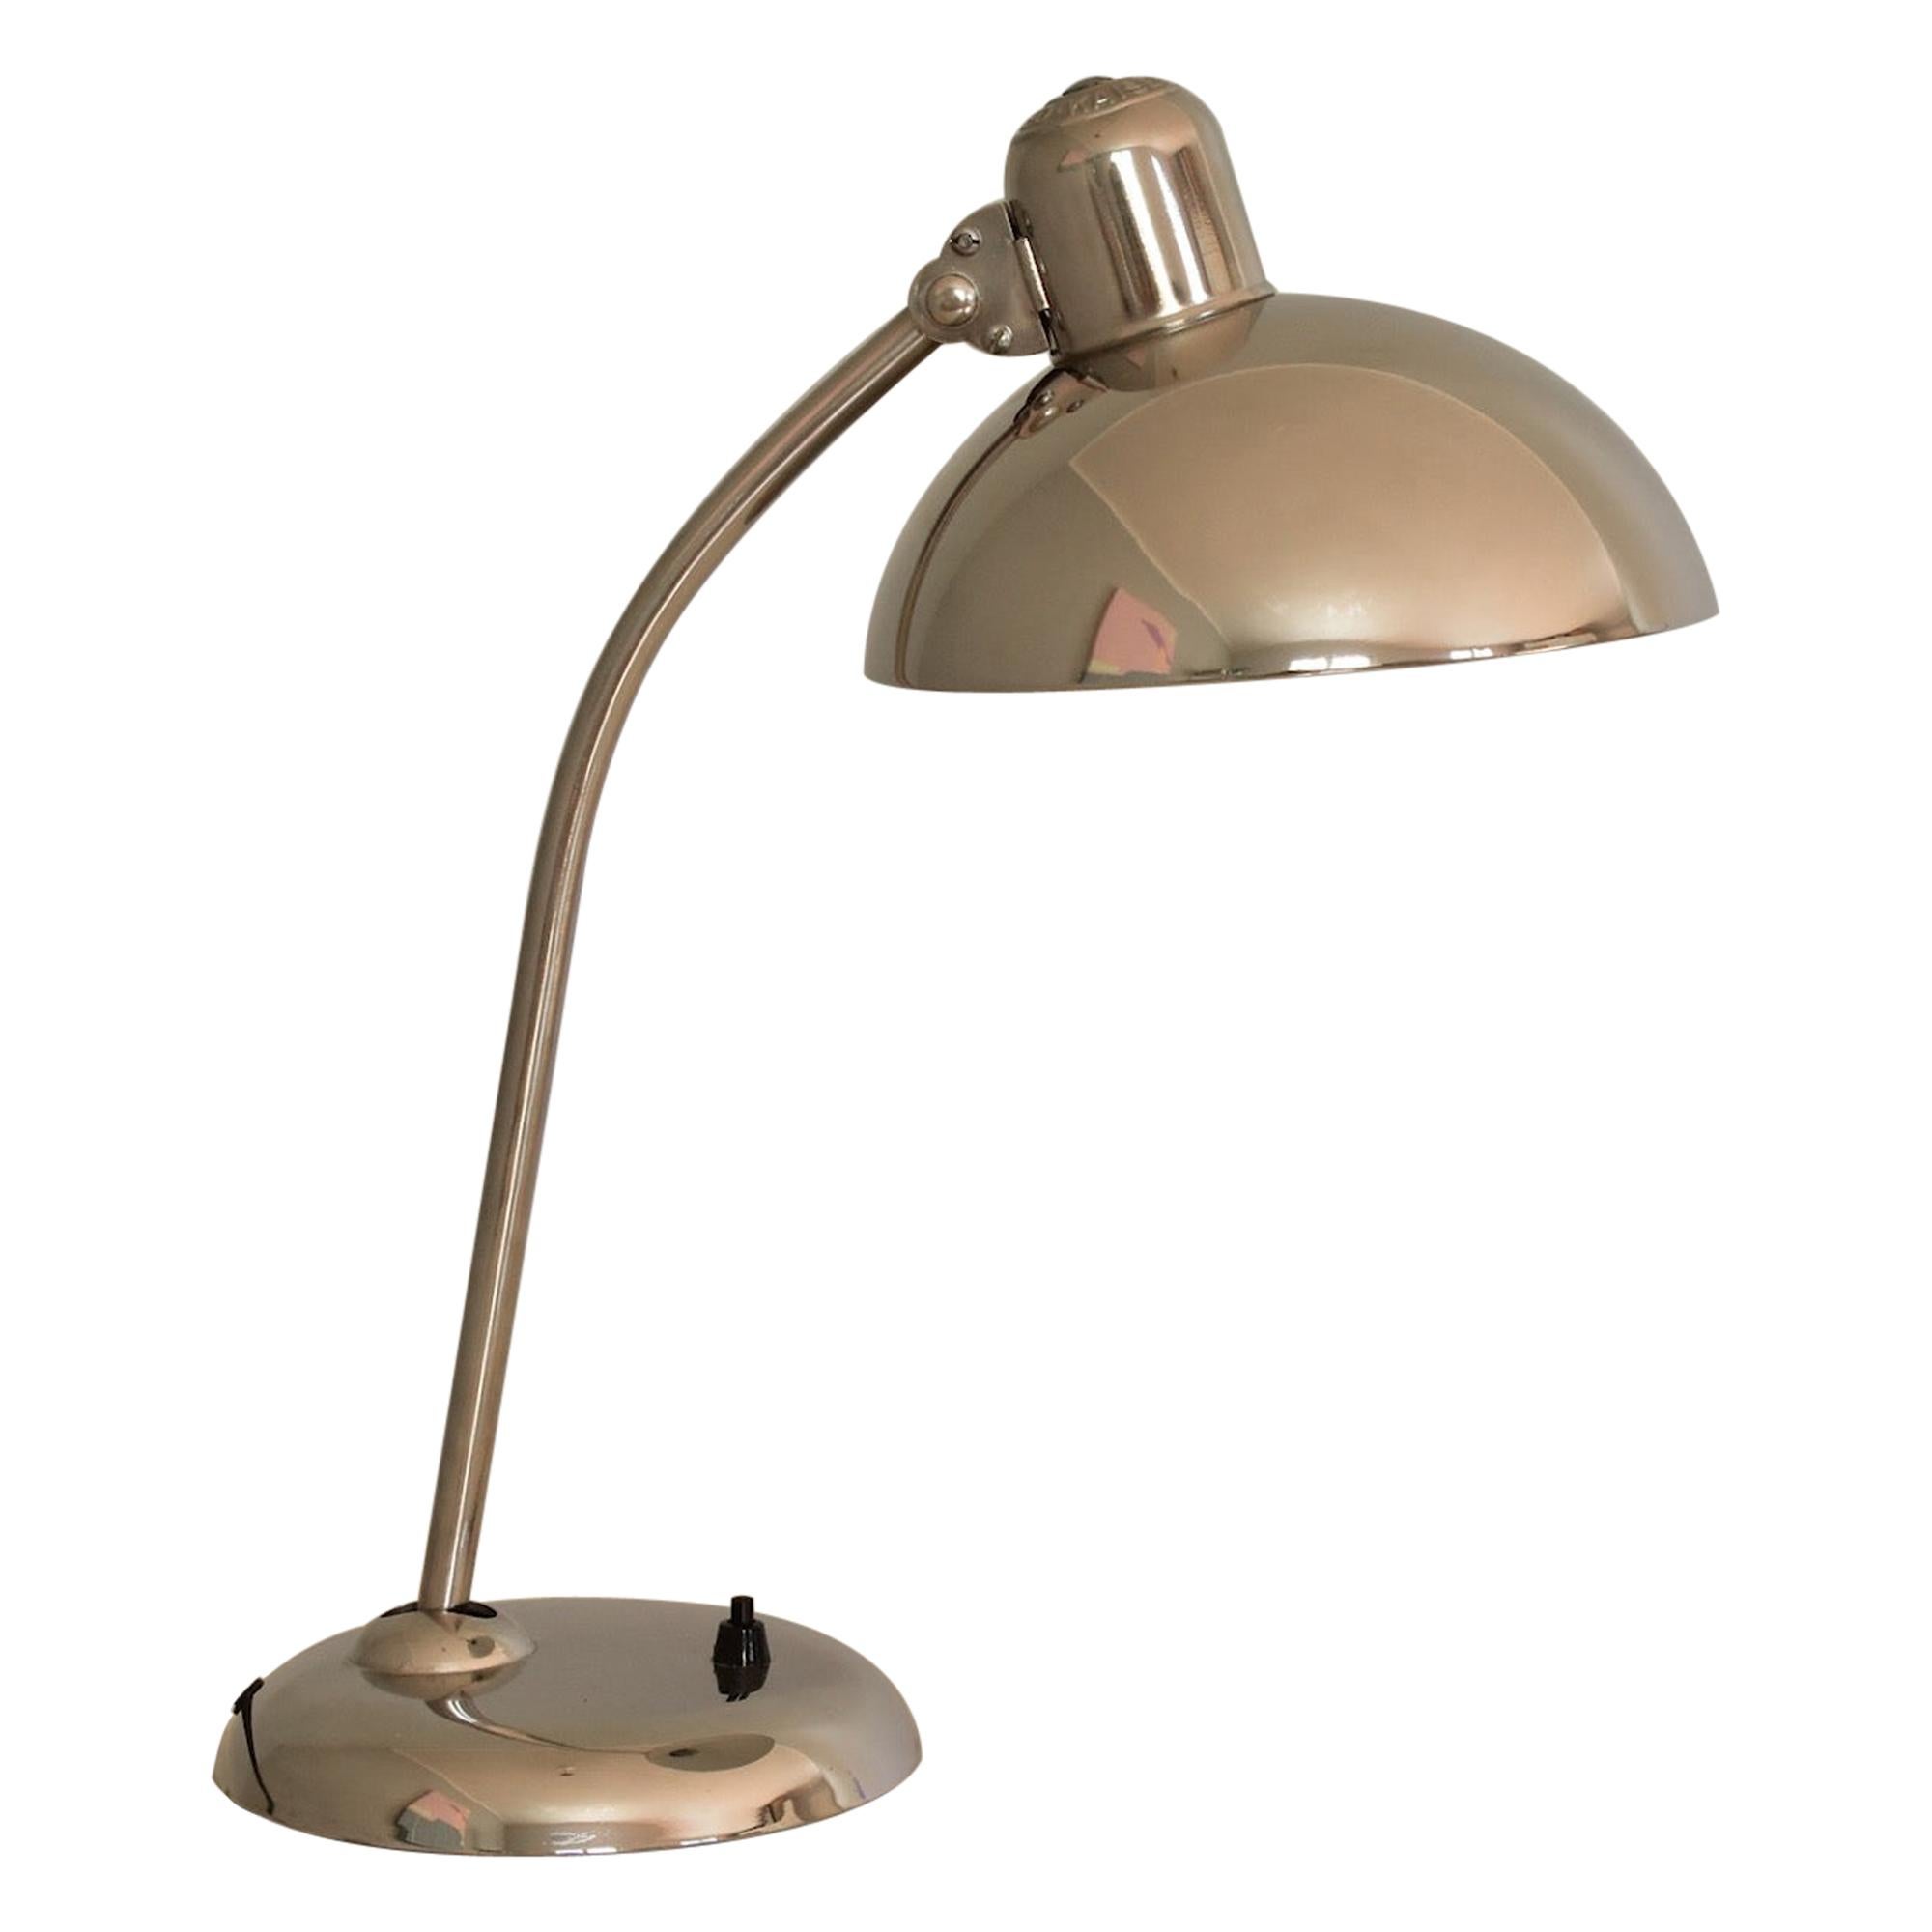 Chrome Christian Dell Table Lamp 6556 by Kaiser Idell Bauhaus, Germany